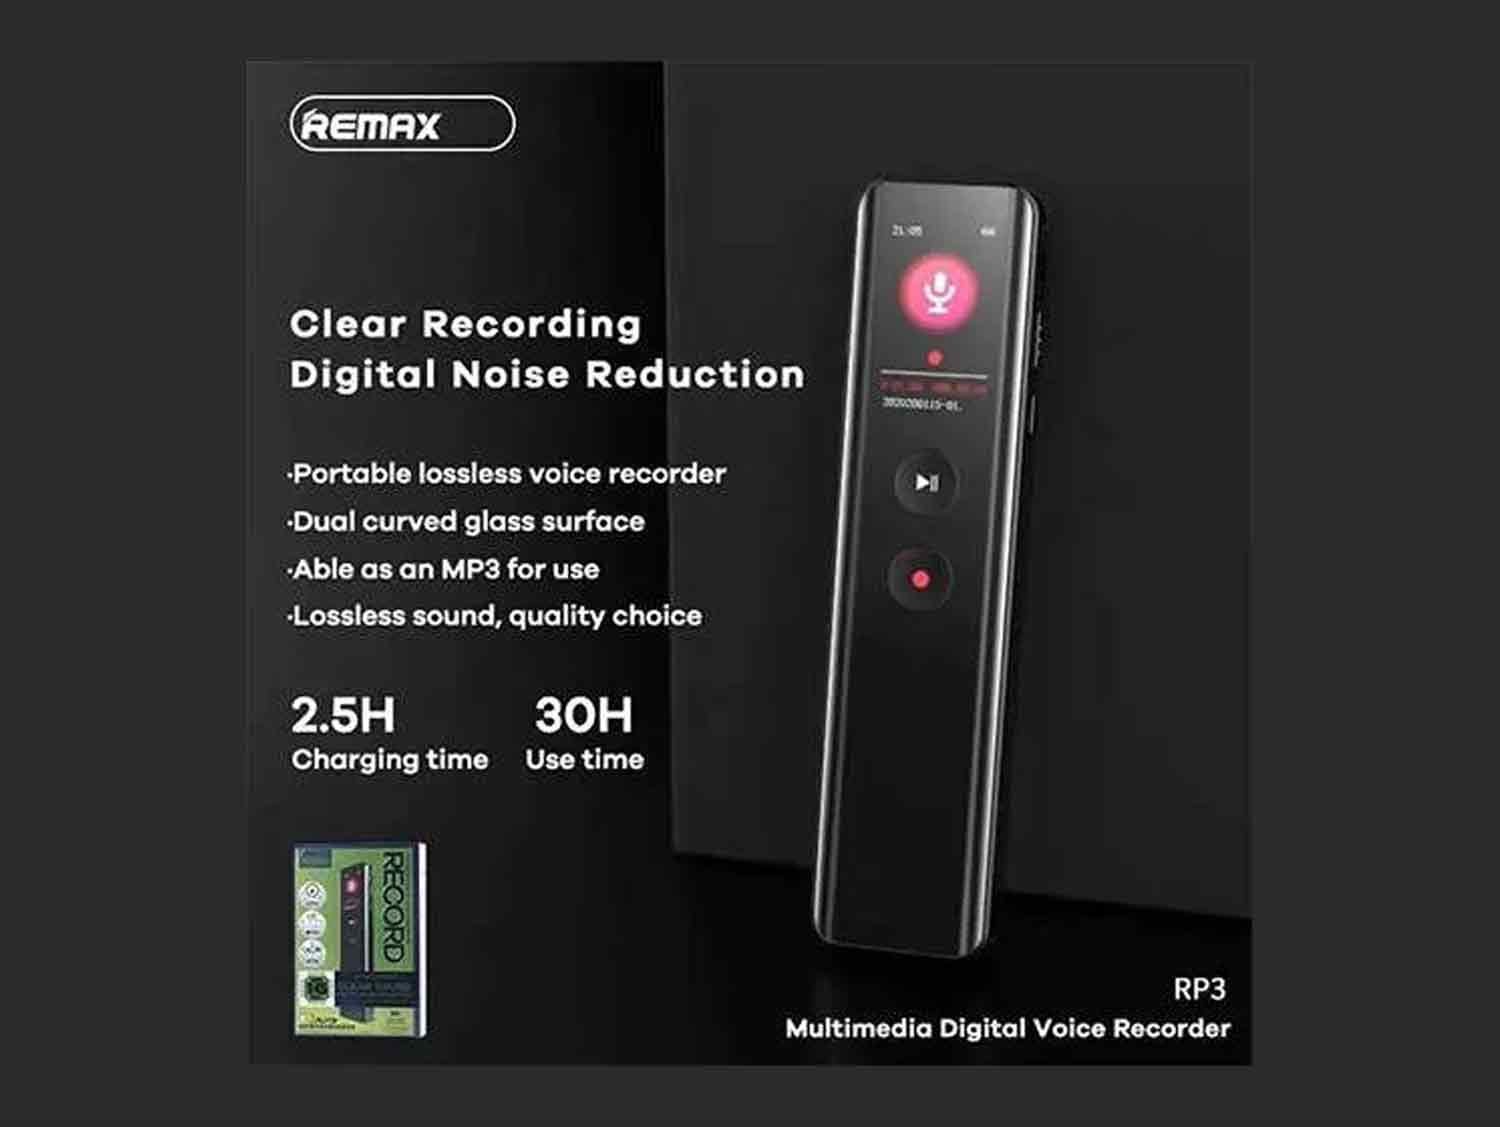 REMAX RP3 16GB Digital Voice Recorder Overview